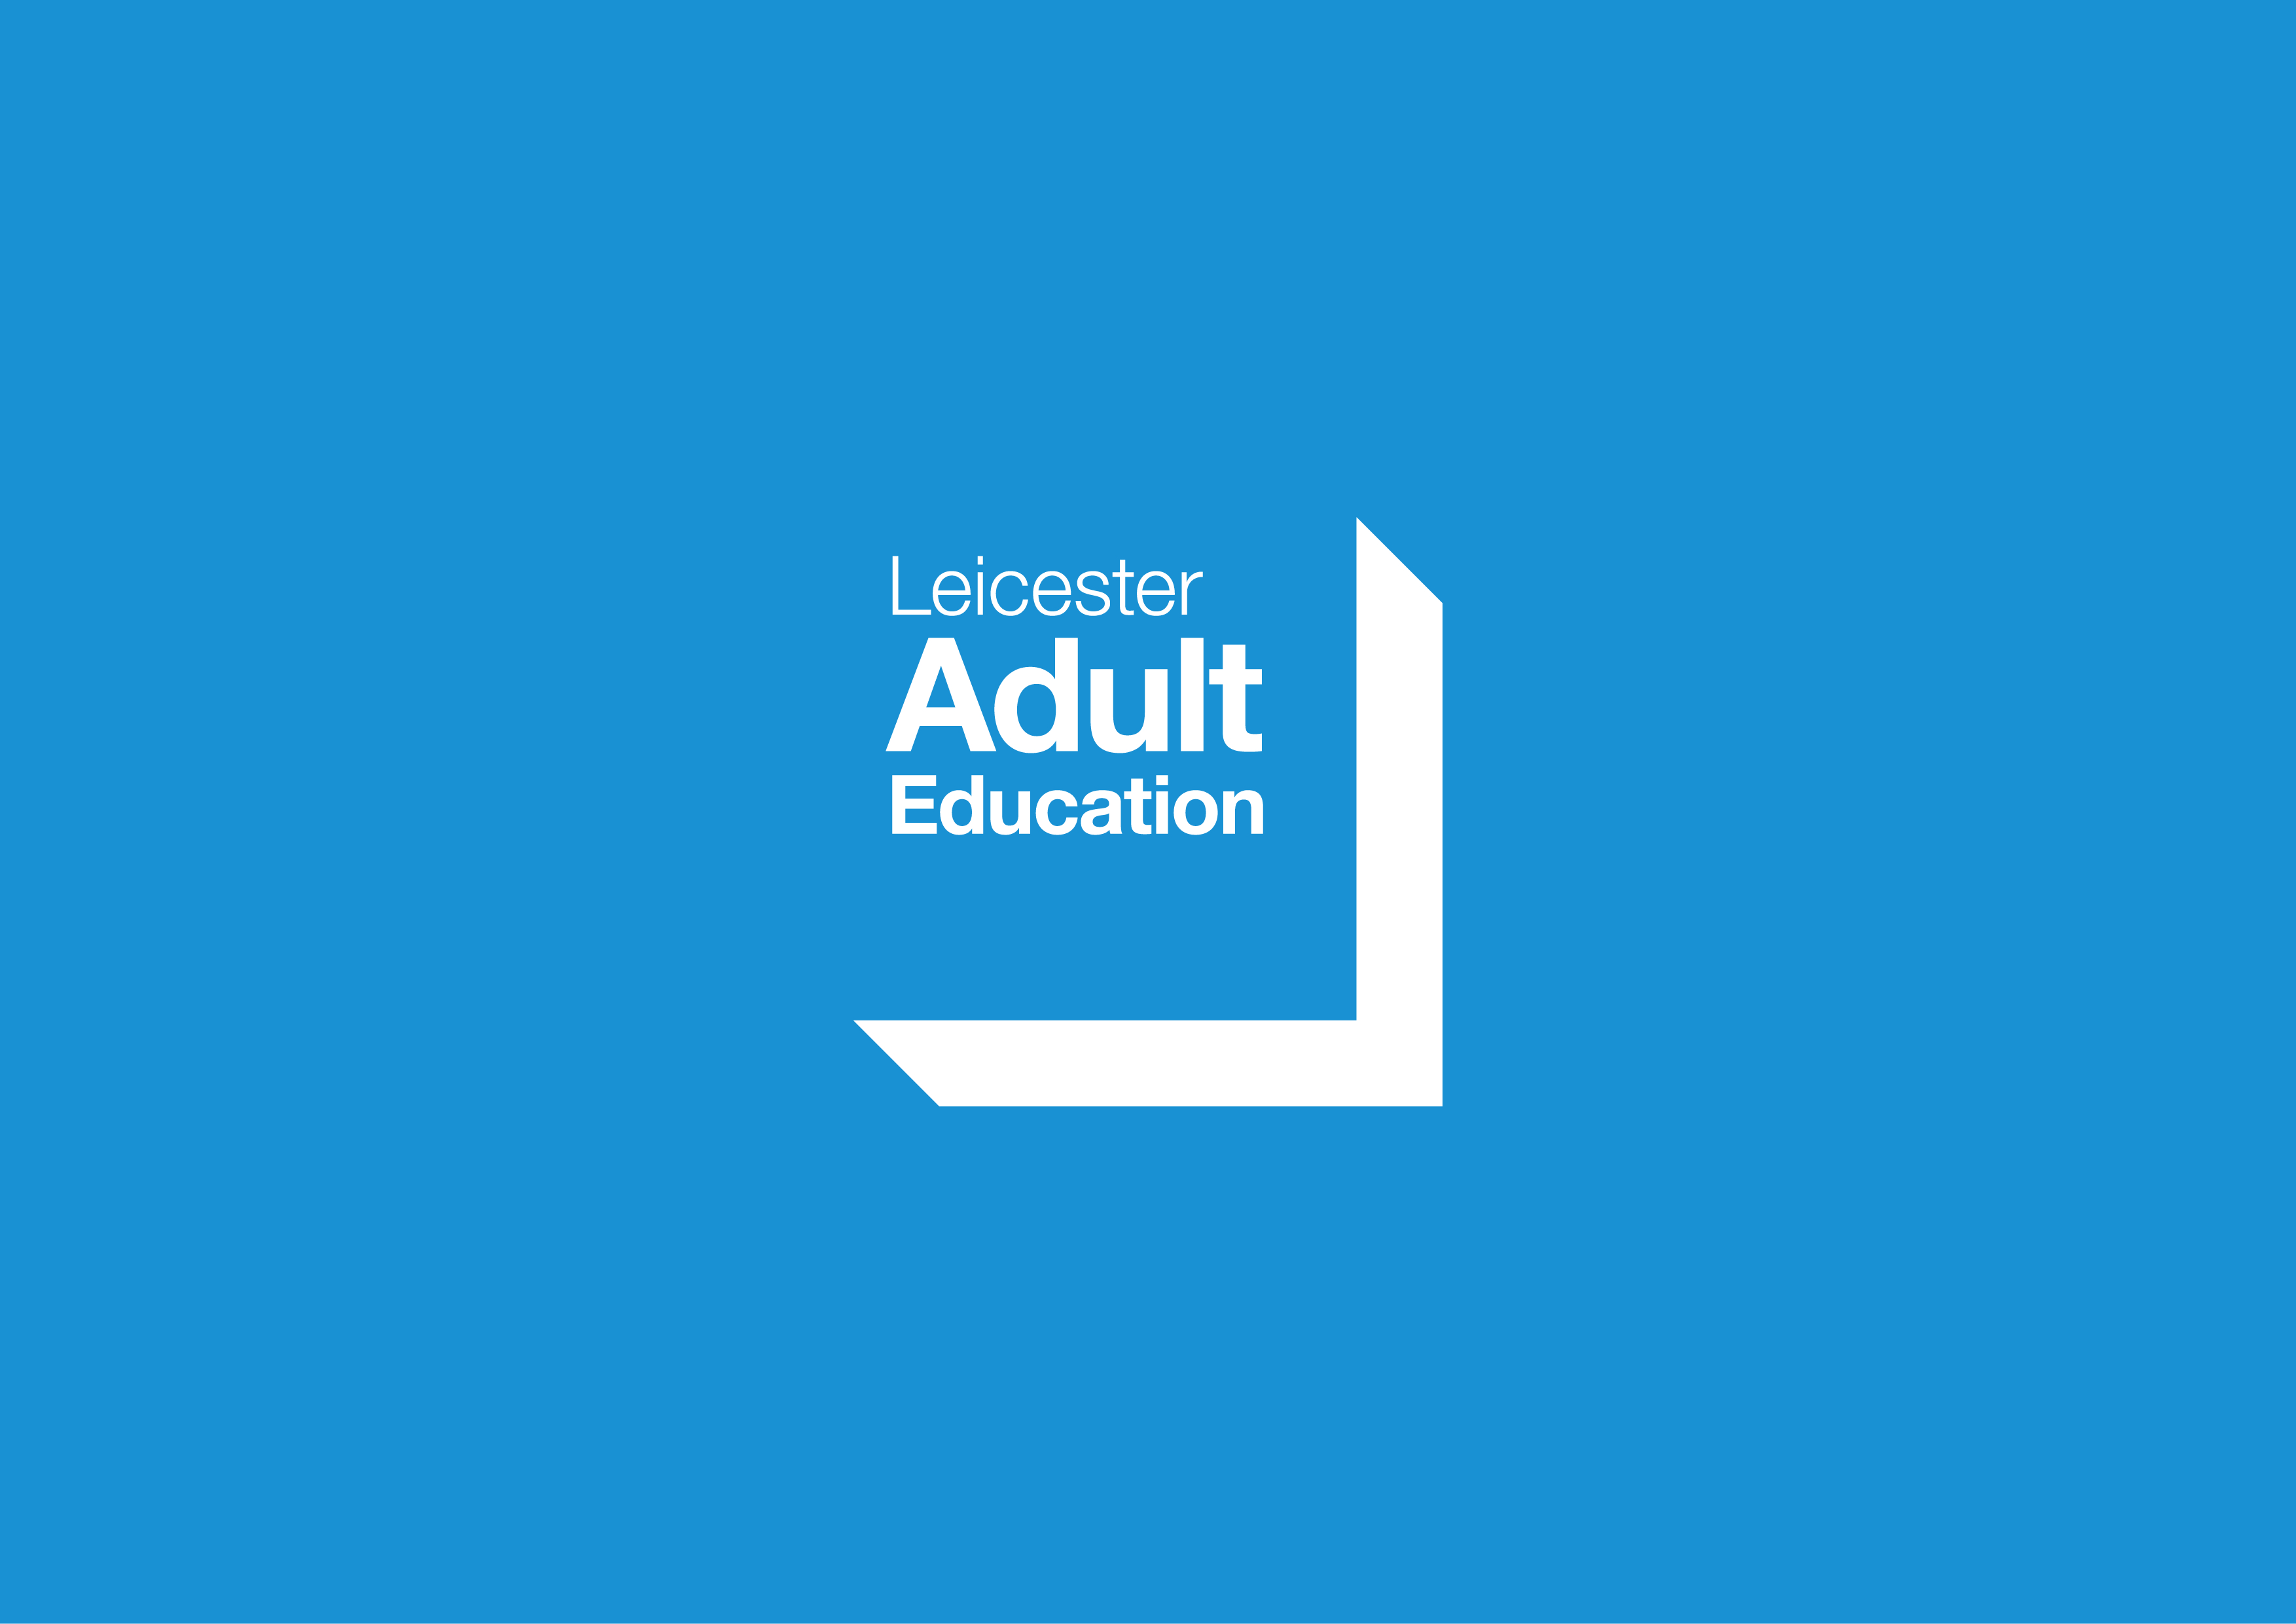 Leicester Adult Education logo on blue background